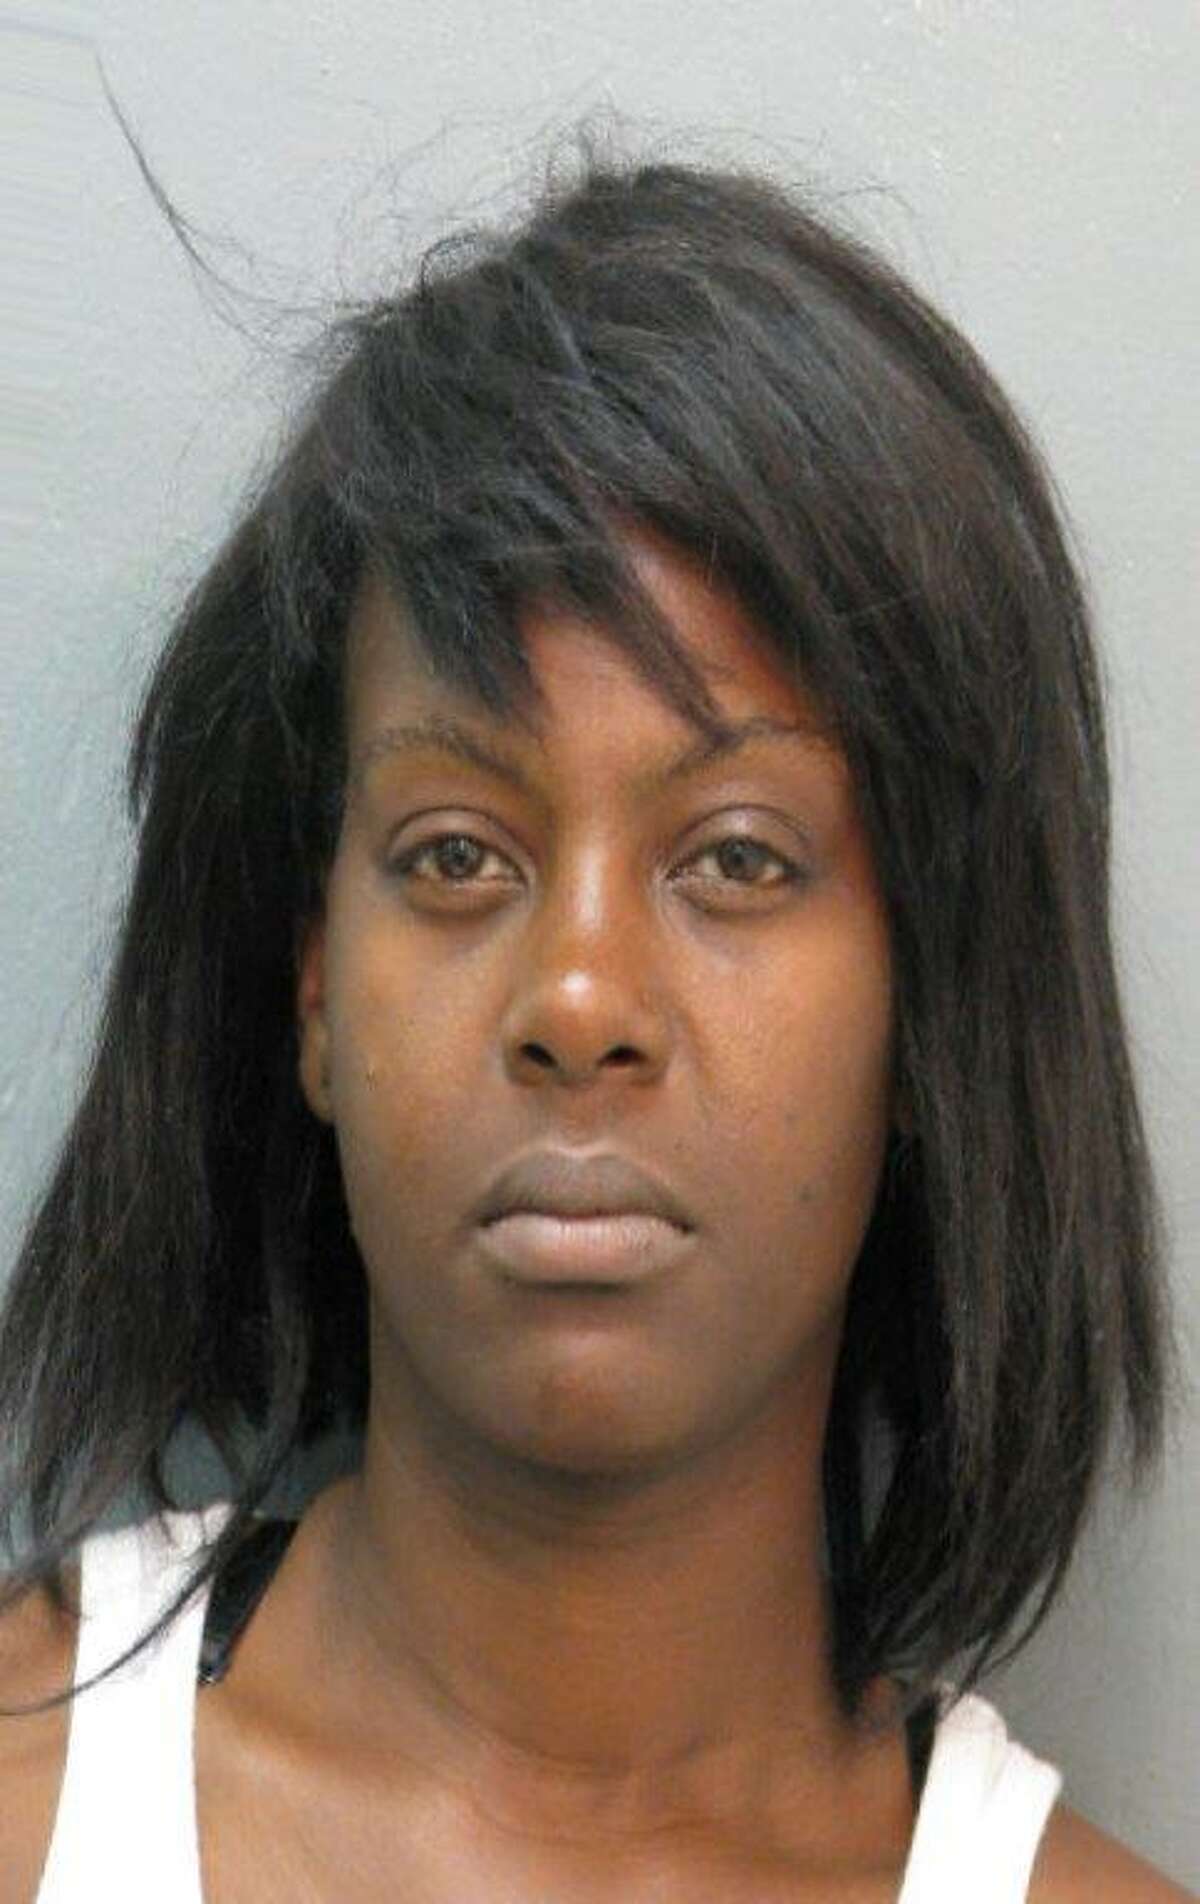 Dashawna Scott of Houston is wanted by the Houston Police Department on a charge of forgery. His warrant is active as of March 16, 2017.